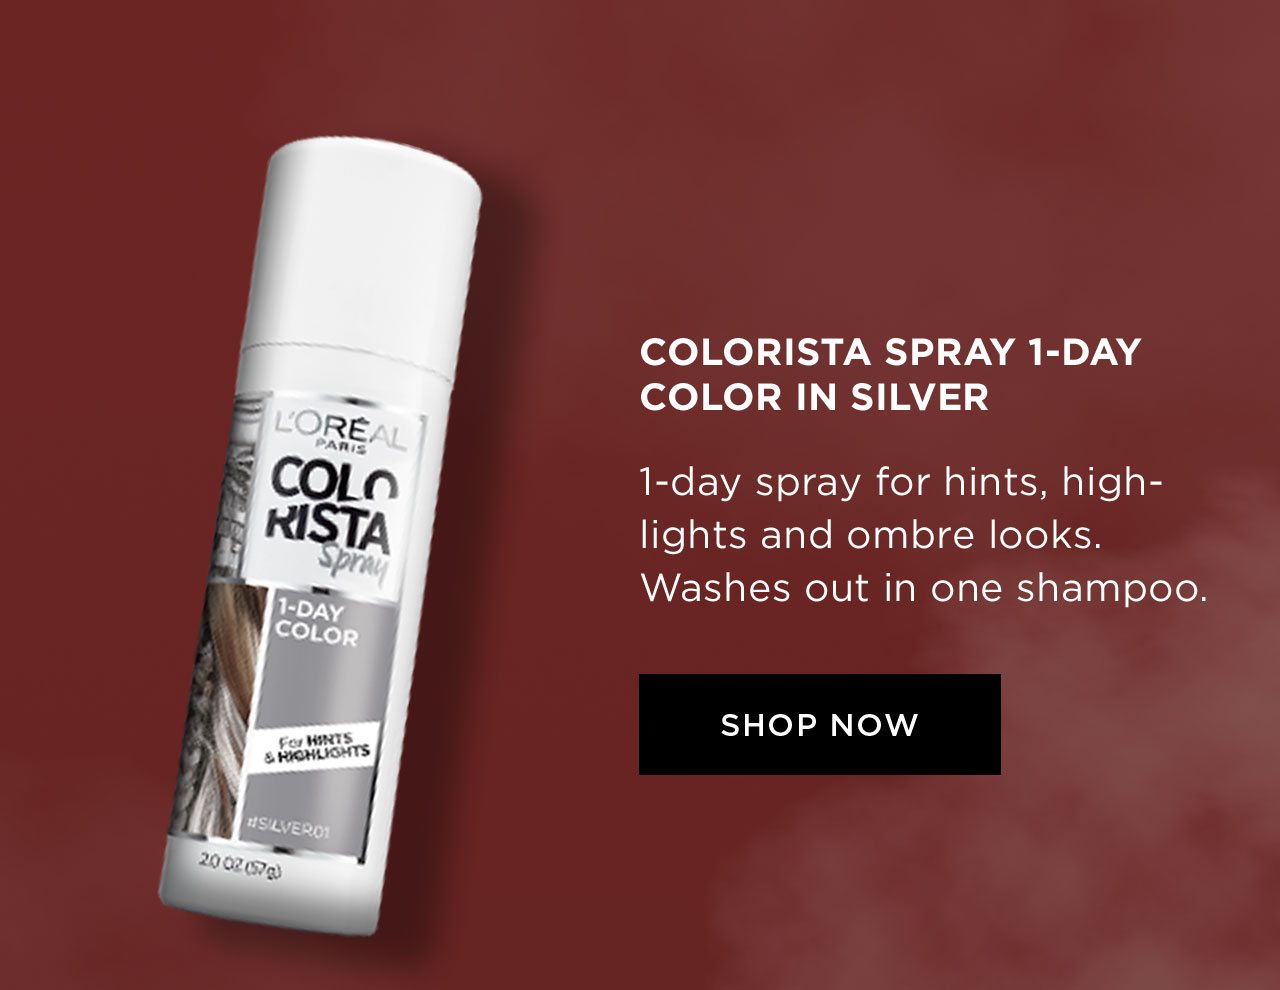 COLORISTA SPRAY 1-DAY COLOR IN SILVER - 1-day spray for hints, highlights and ombre looks. Washes out in one shampoo. - SHOP NOW